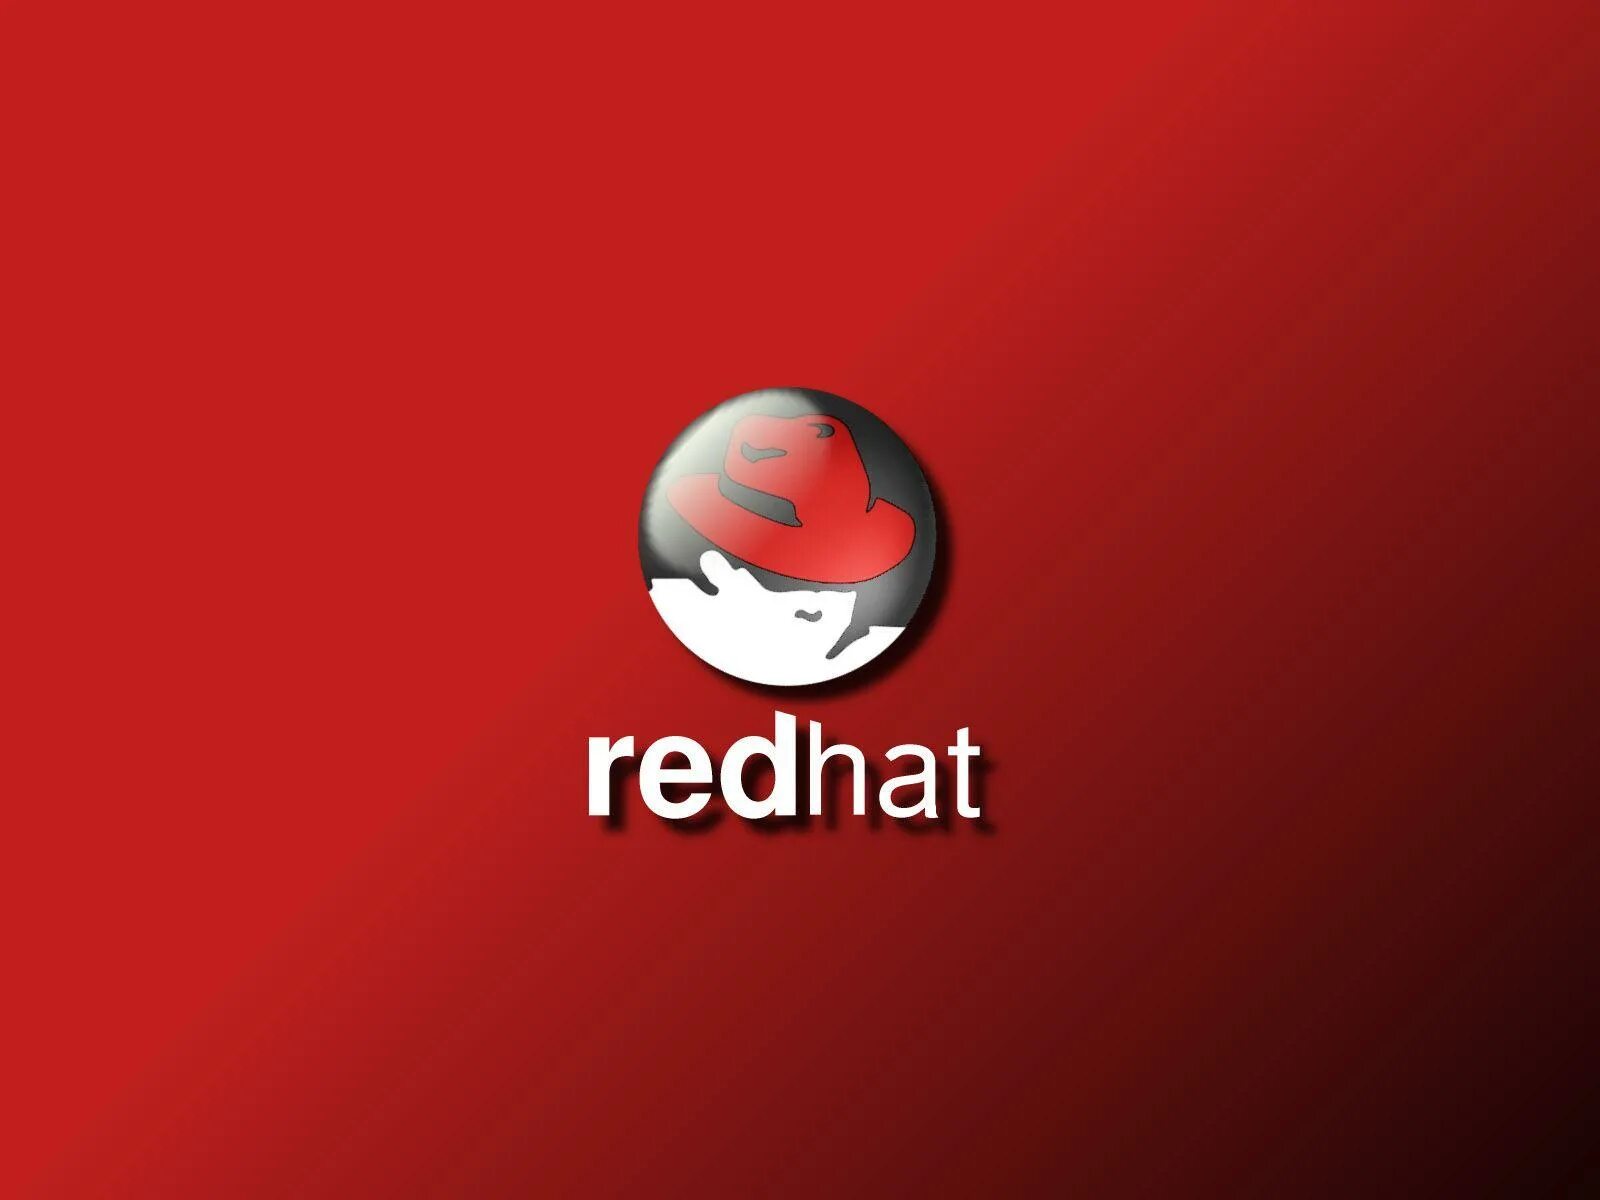 Линукс Red hat. Red hat Enterprise Linux 7. Red hat Enterprise Linux. Red hat Enterprise Linux логотип. Red hat 8